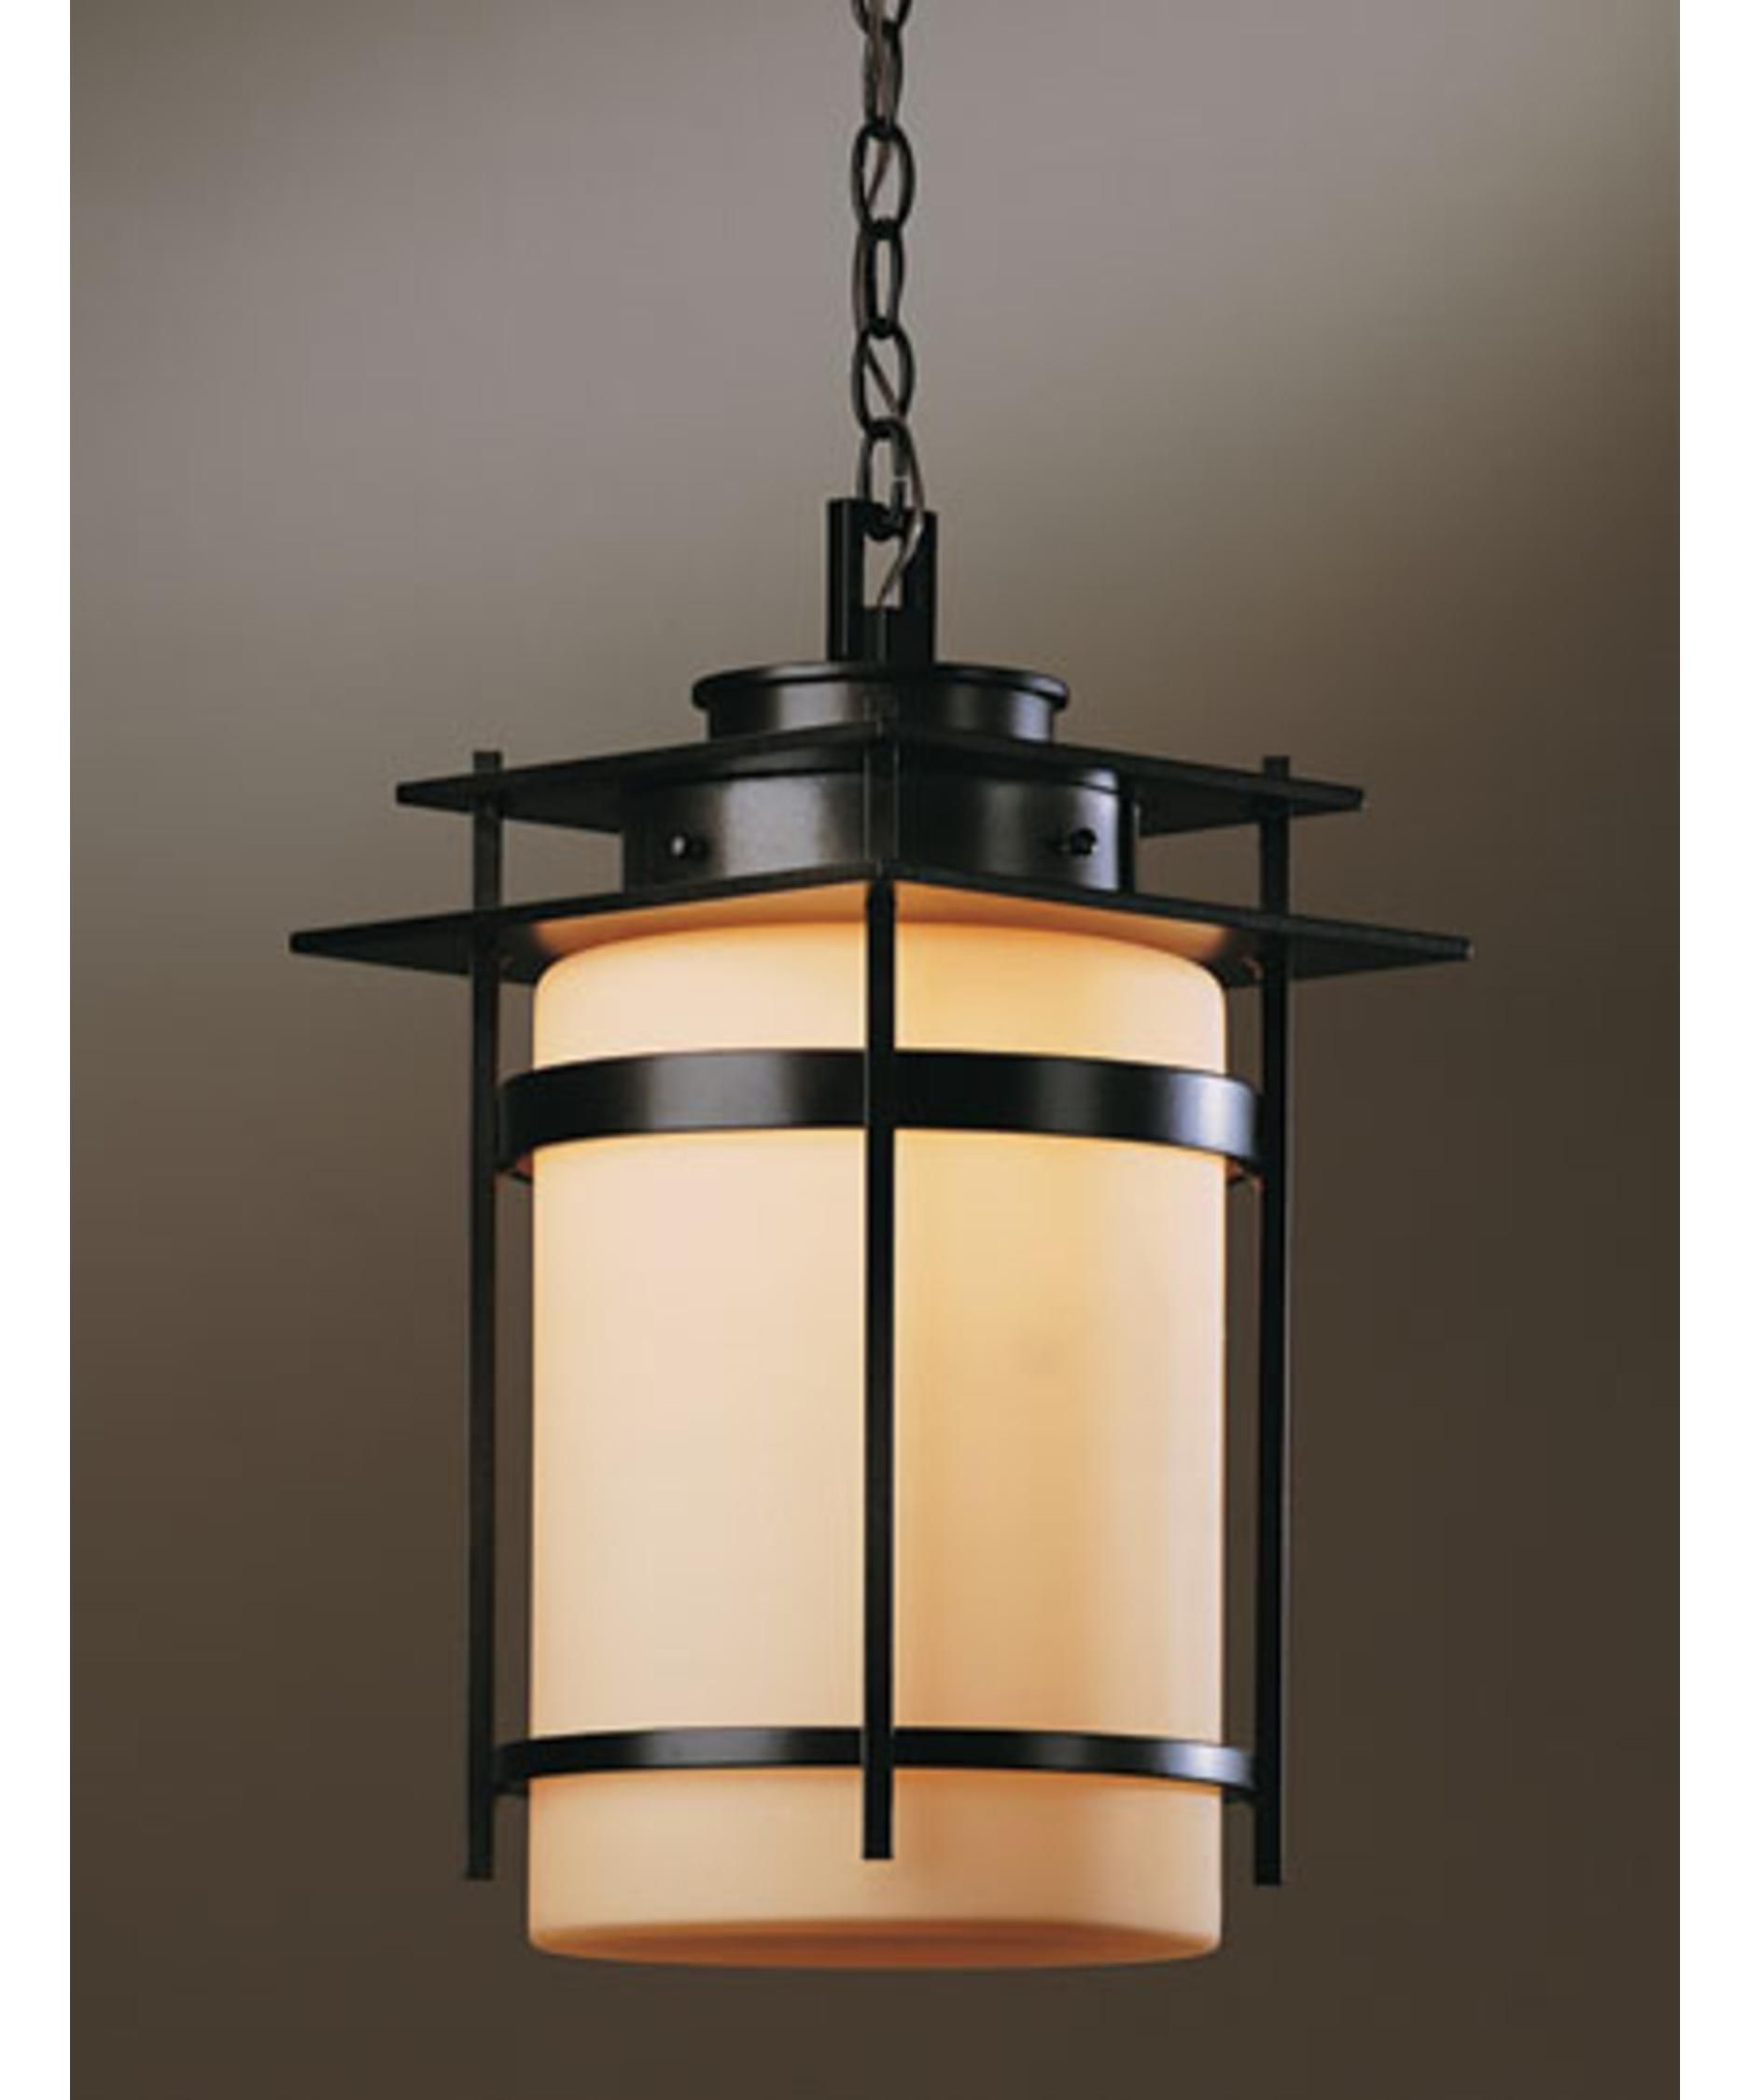 Hanging Porch Light Oil Rubbed Bronze Outdoor Lights Houzz 12 Inside Houzz Outdoor Hanging Lights (View 5 of 15)